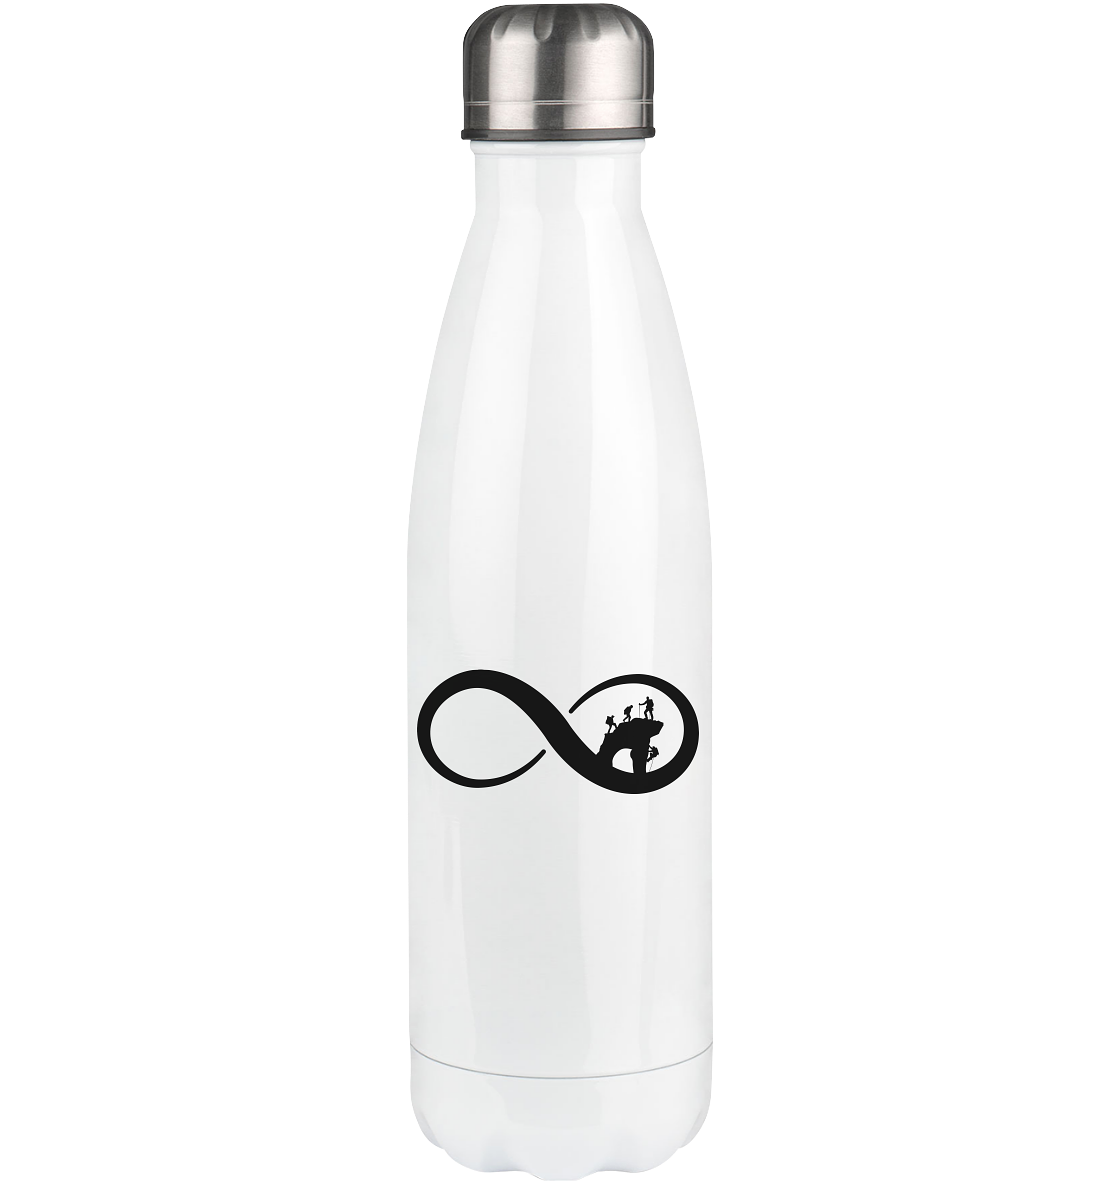 Infinity and Climbing - Edelstahl Thermosflasche klettern 500ml